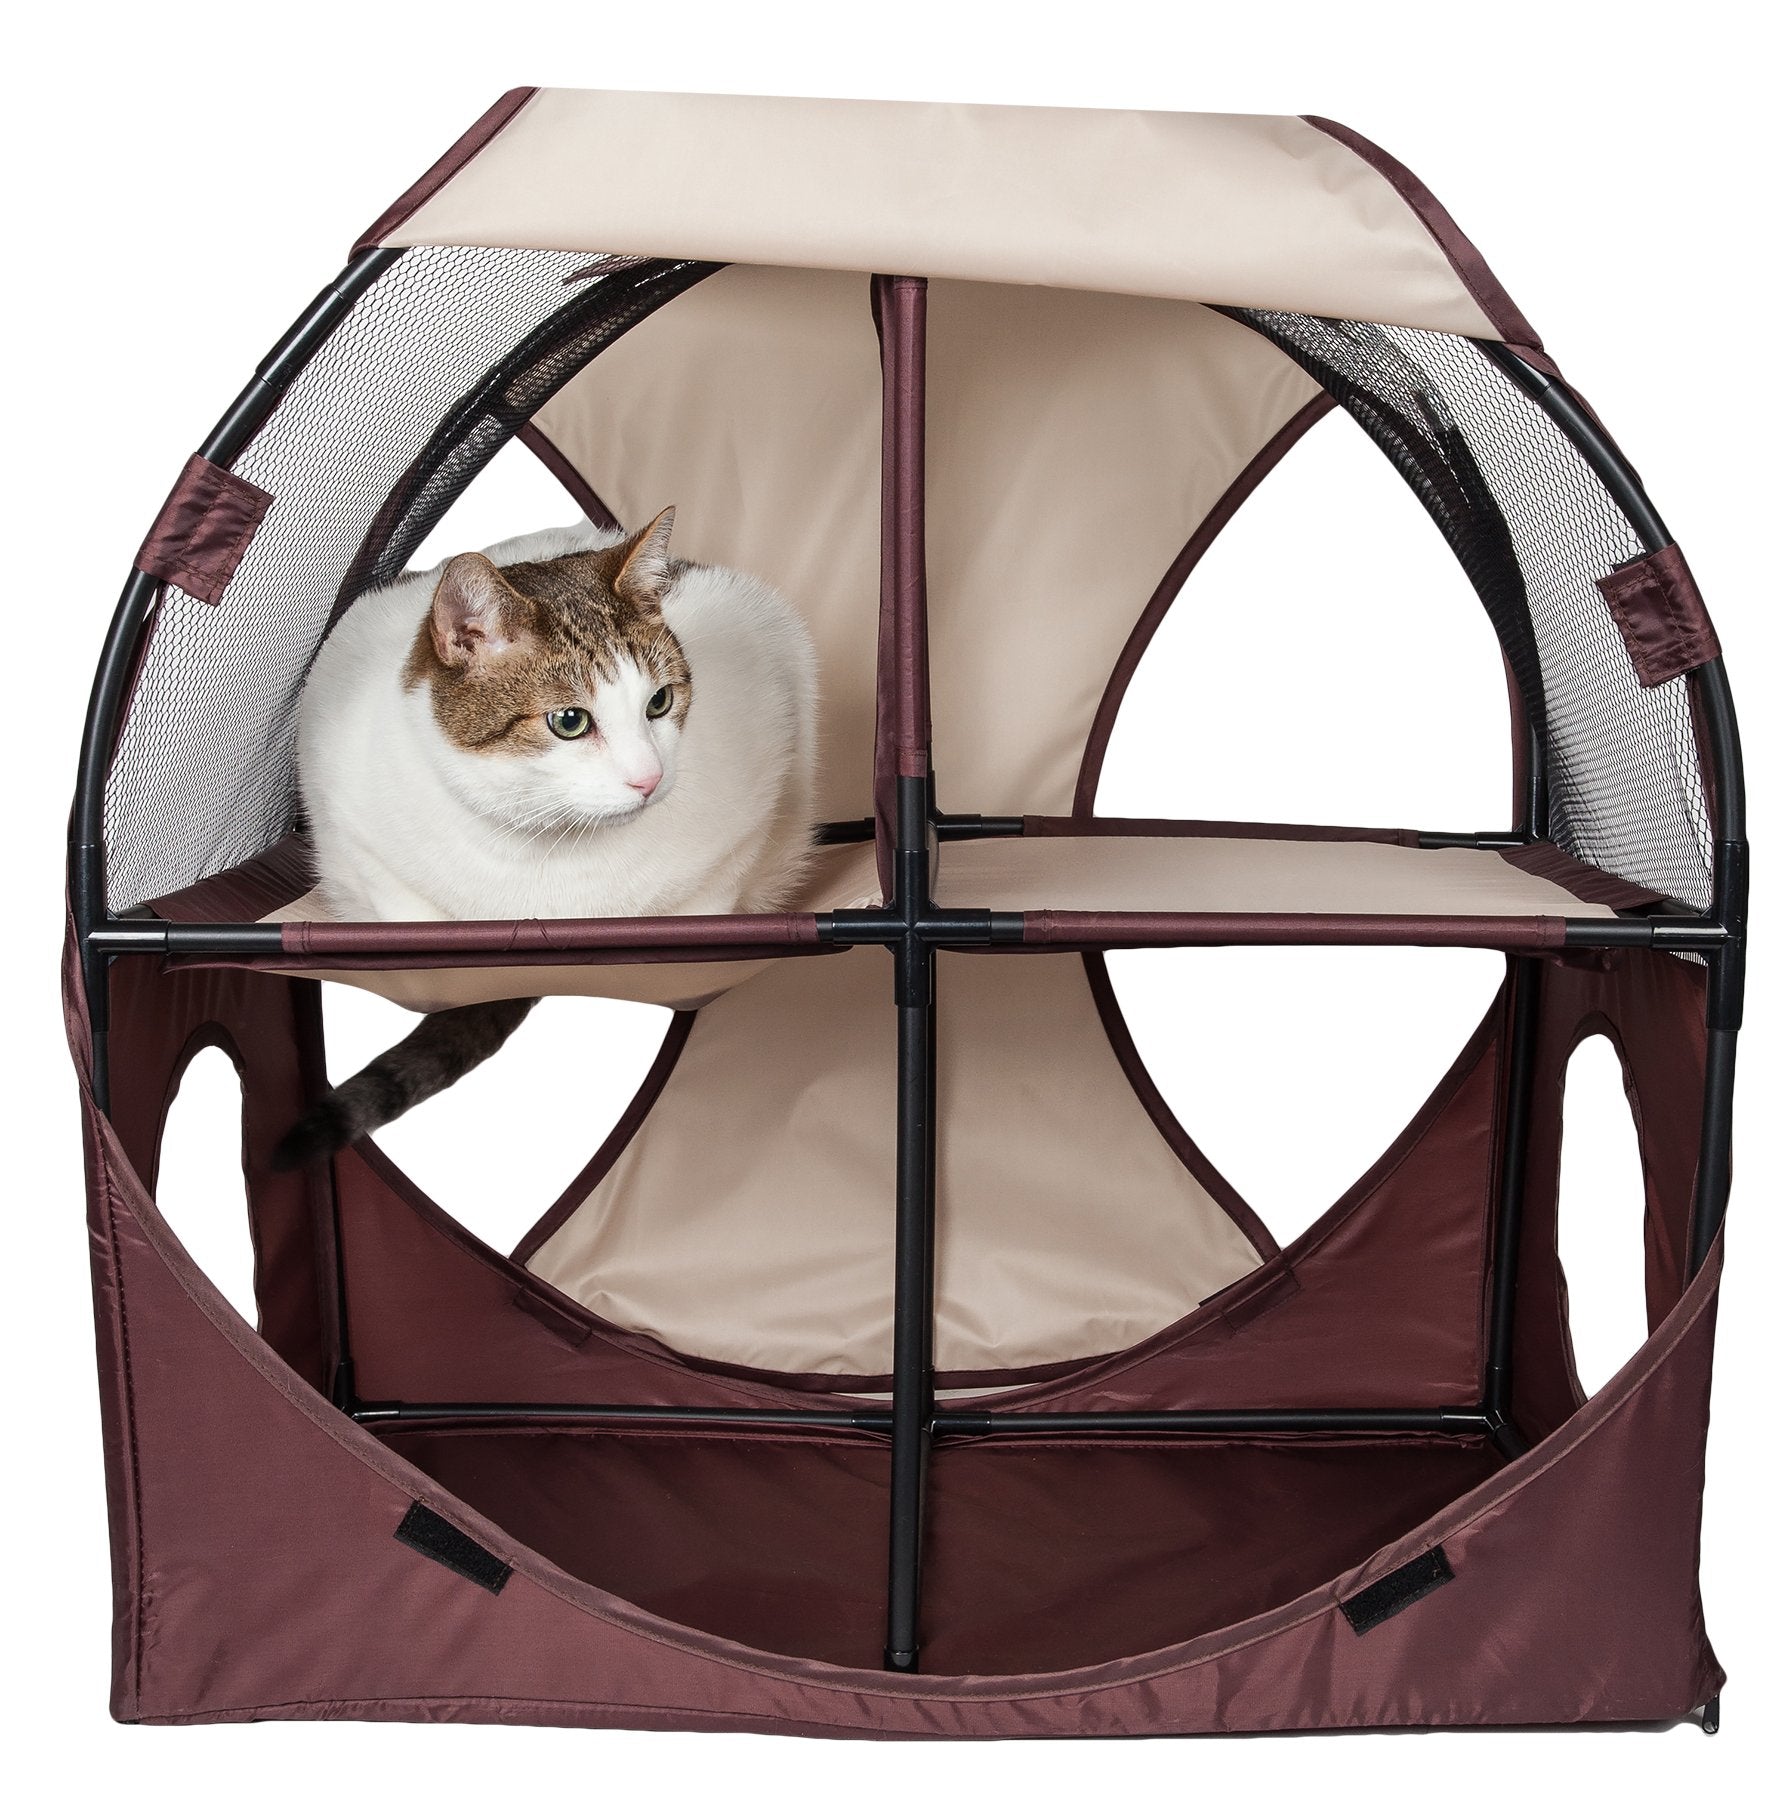 Pet Life Kitty-Play Travel Cat House - Red